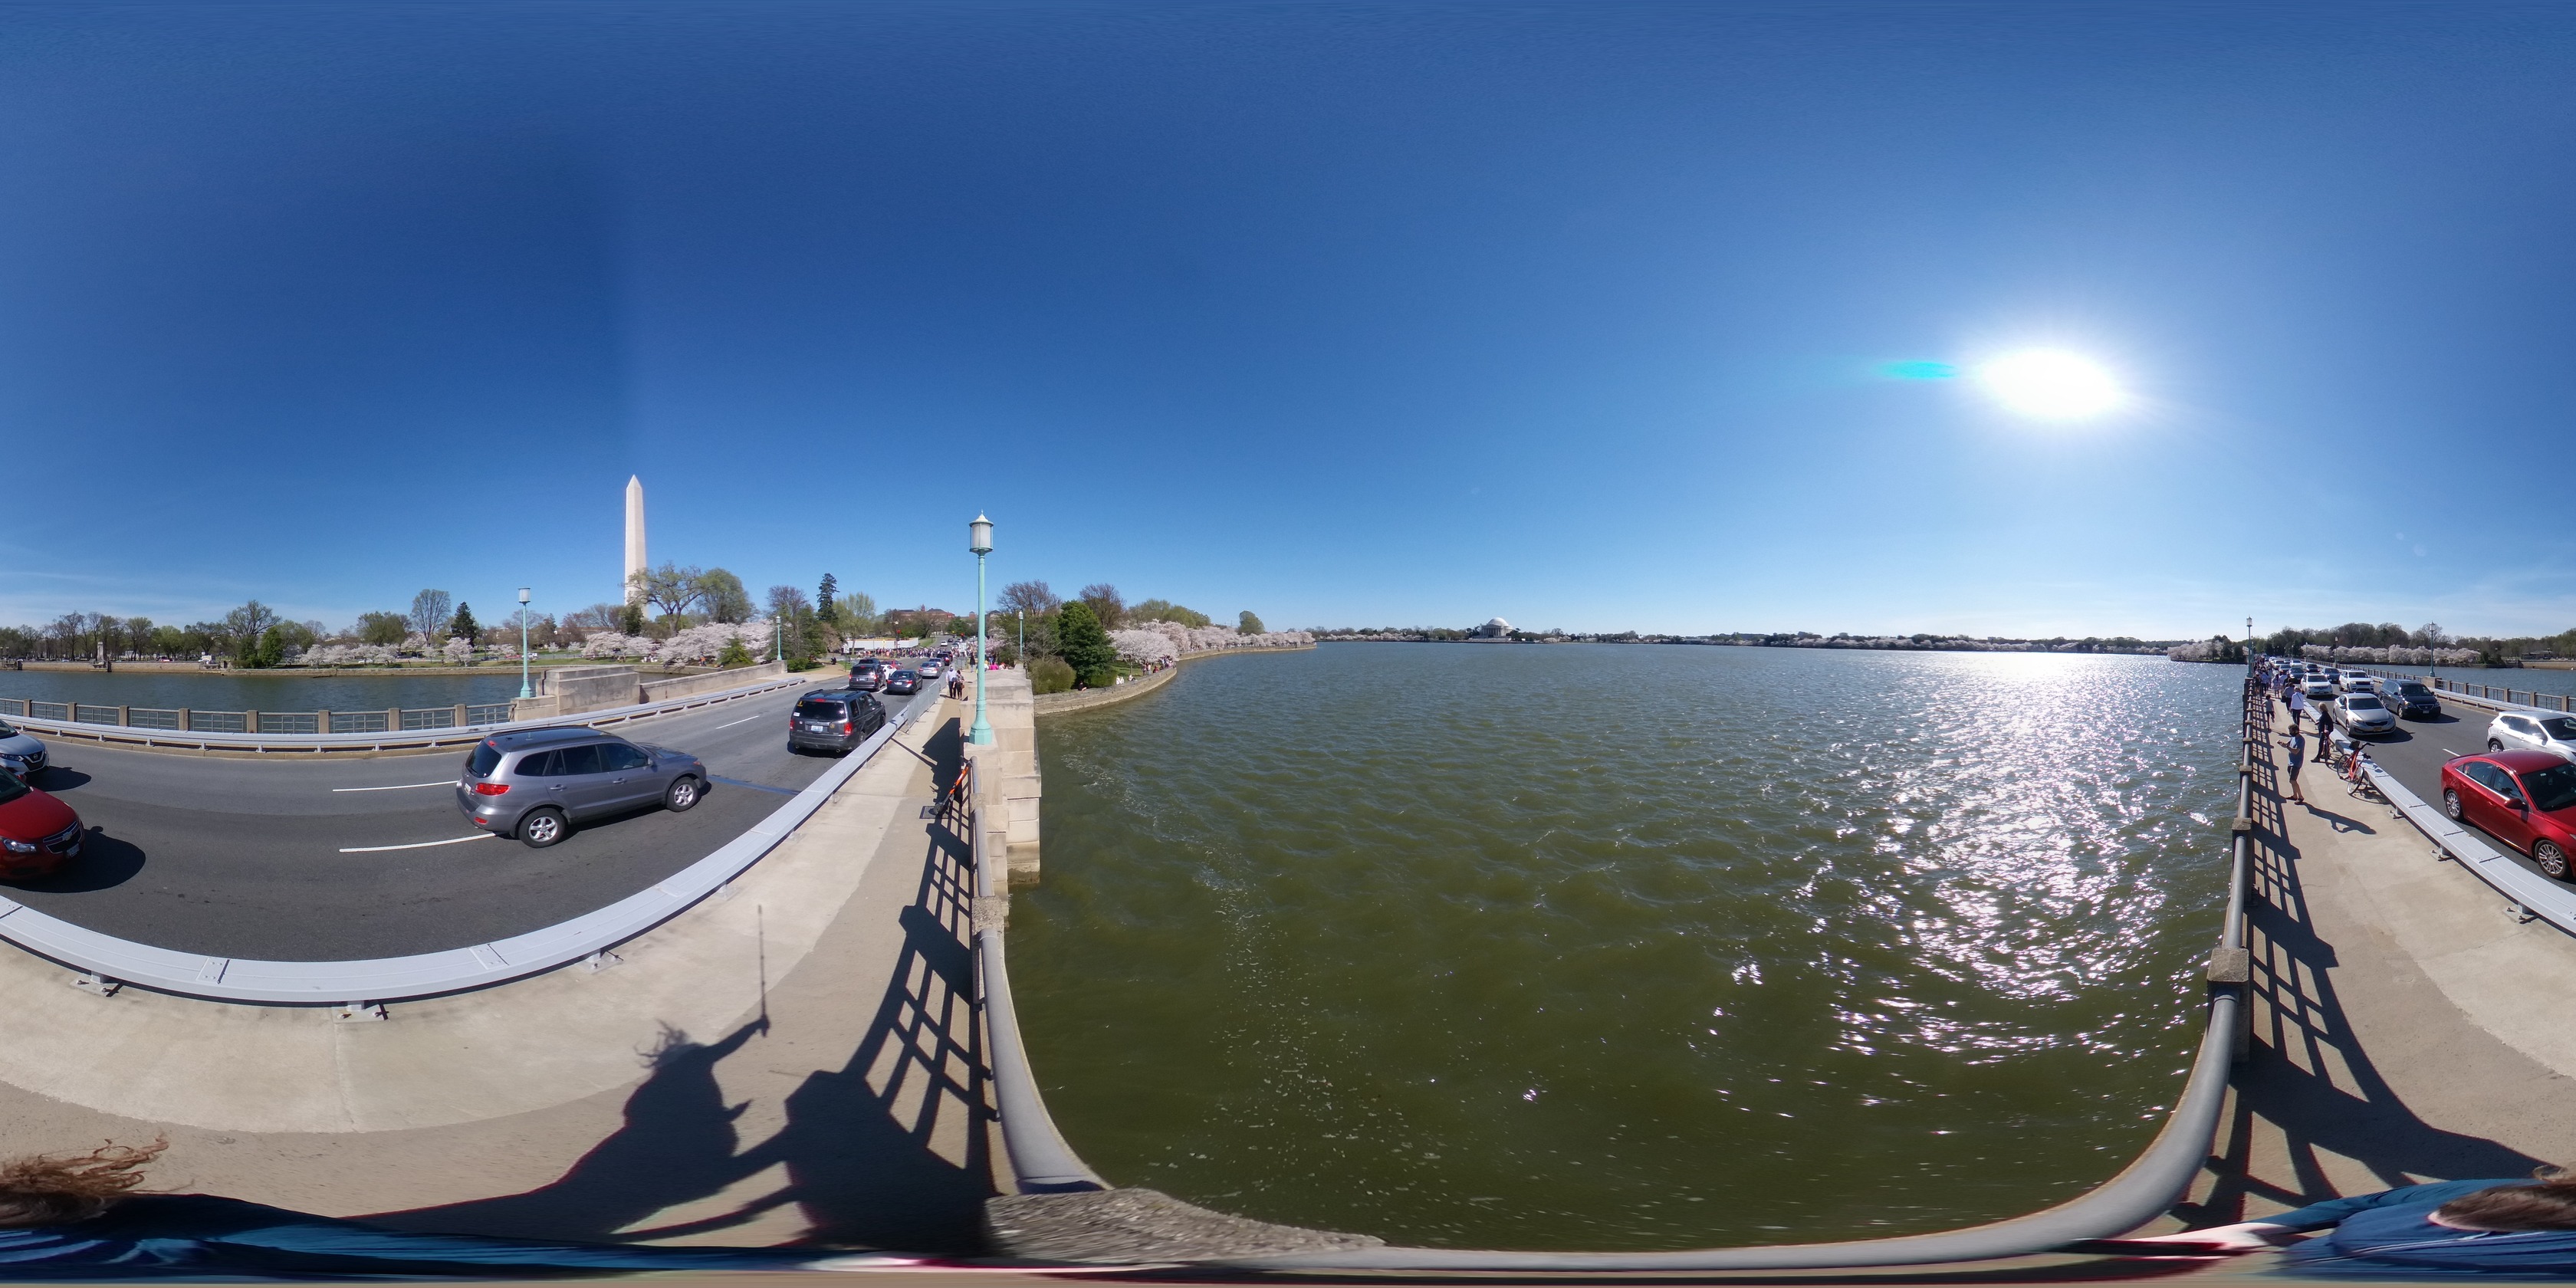 Spherical image that includes people walking across a bridge over a large tidal basin lined with cherry blossom trees in full bloom.  The Washington Monument and Thomas Jefferson Memorial are visible in the distance across the tidal basin. Many cars are driving across the bridge.